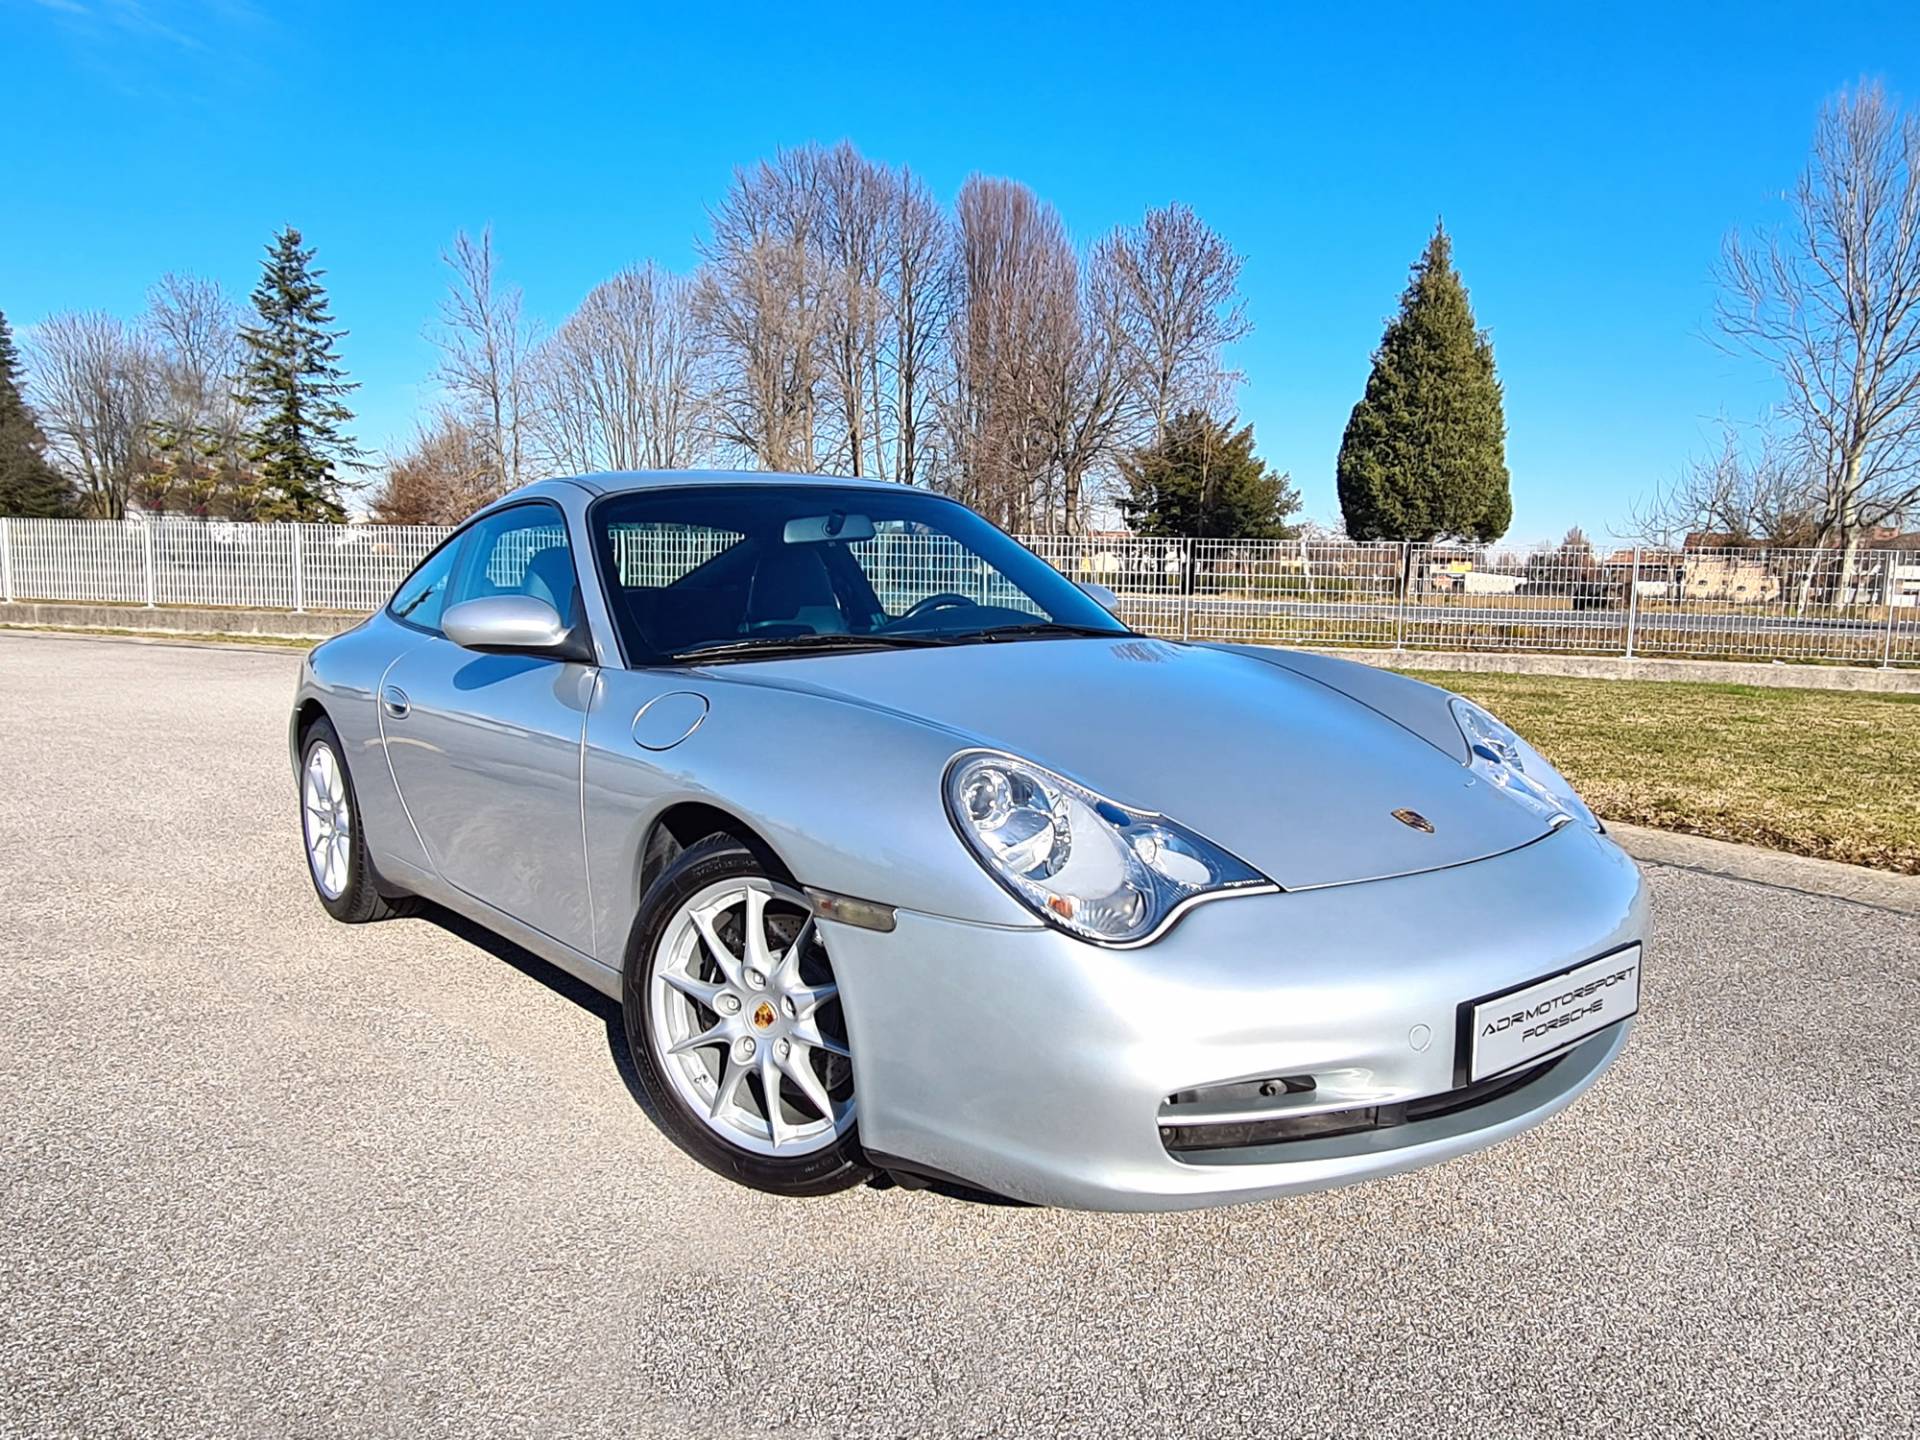 For Sale: Porsche 911 Carrera (2003) offered for $72,360